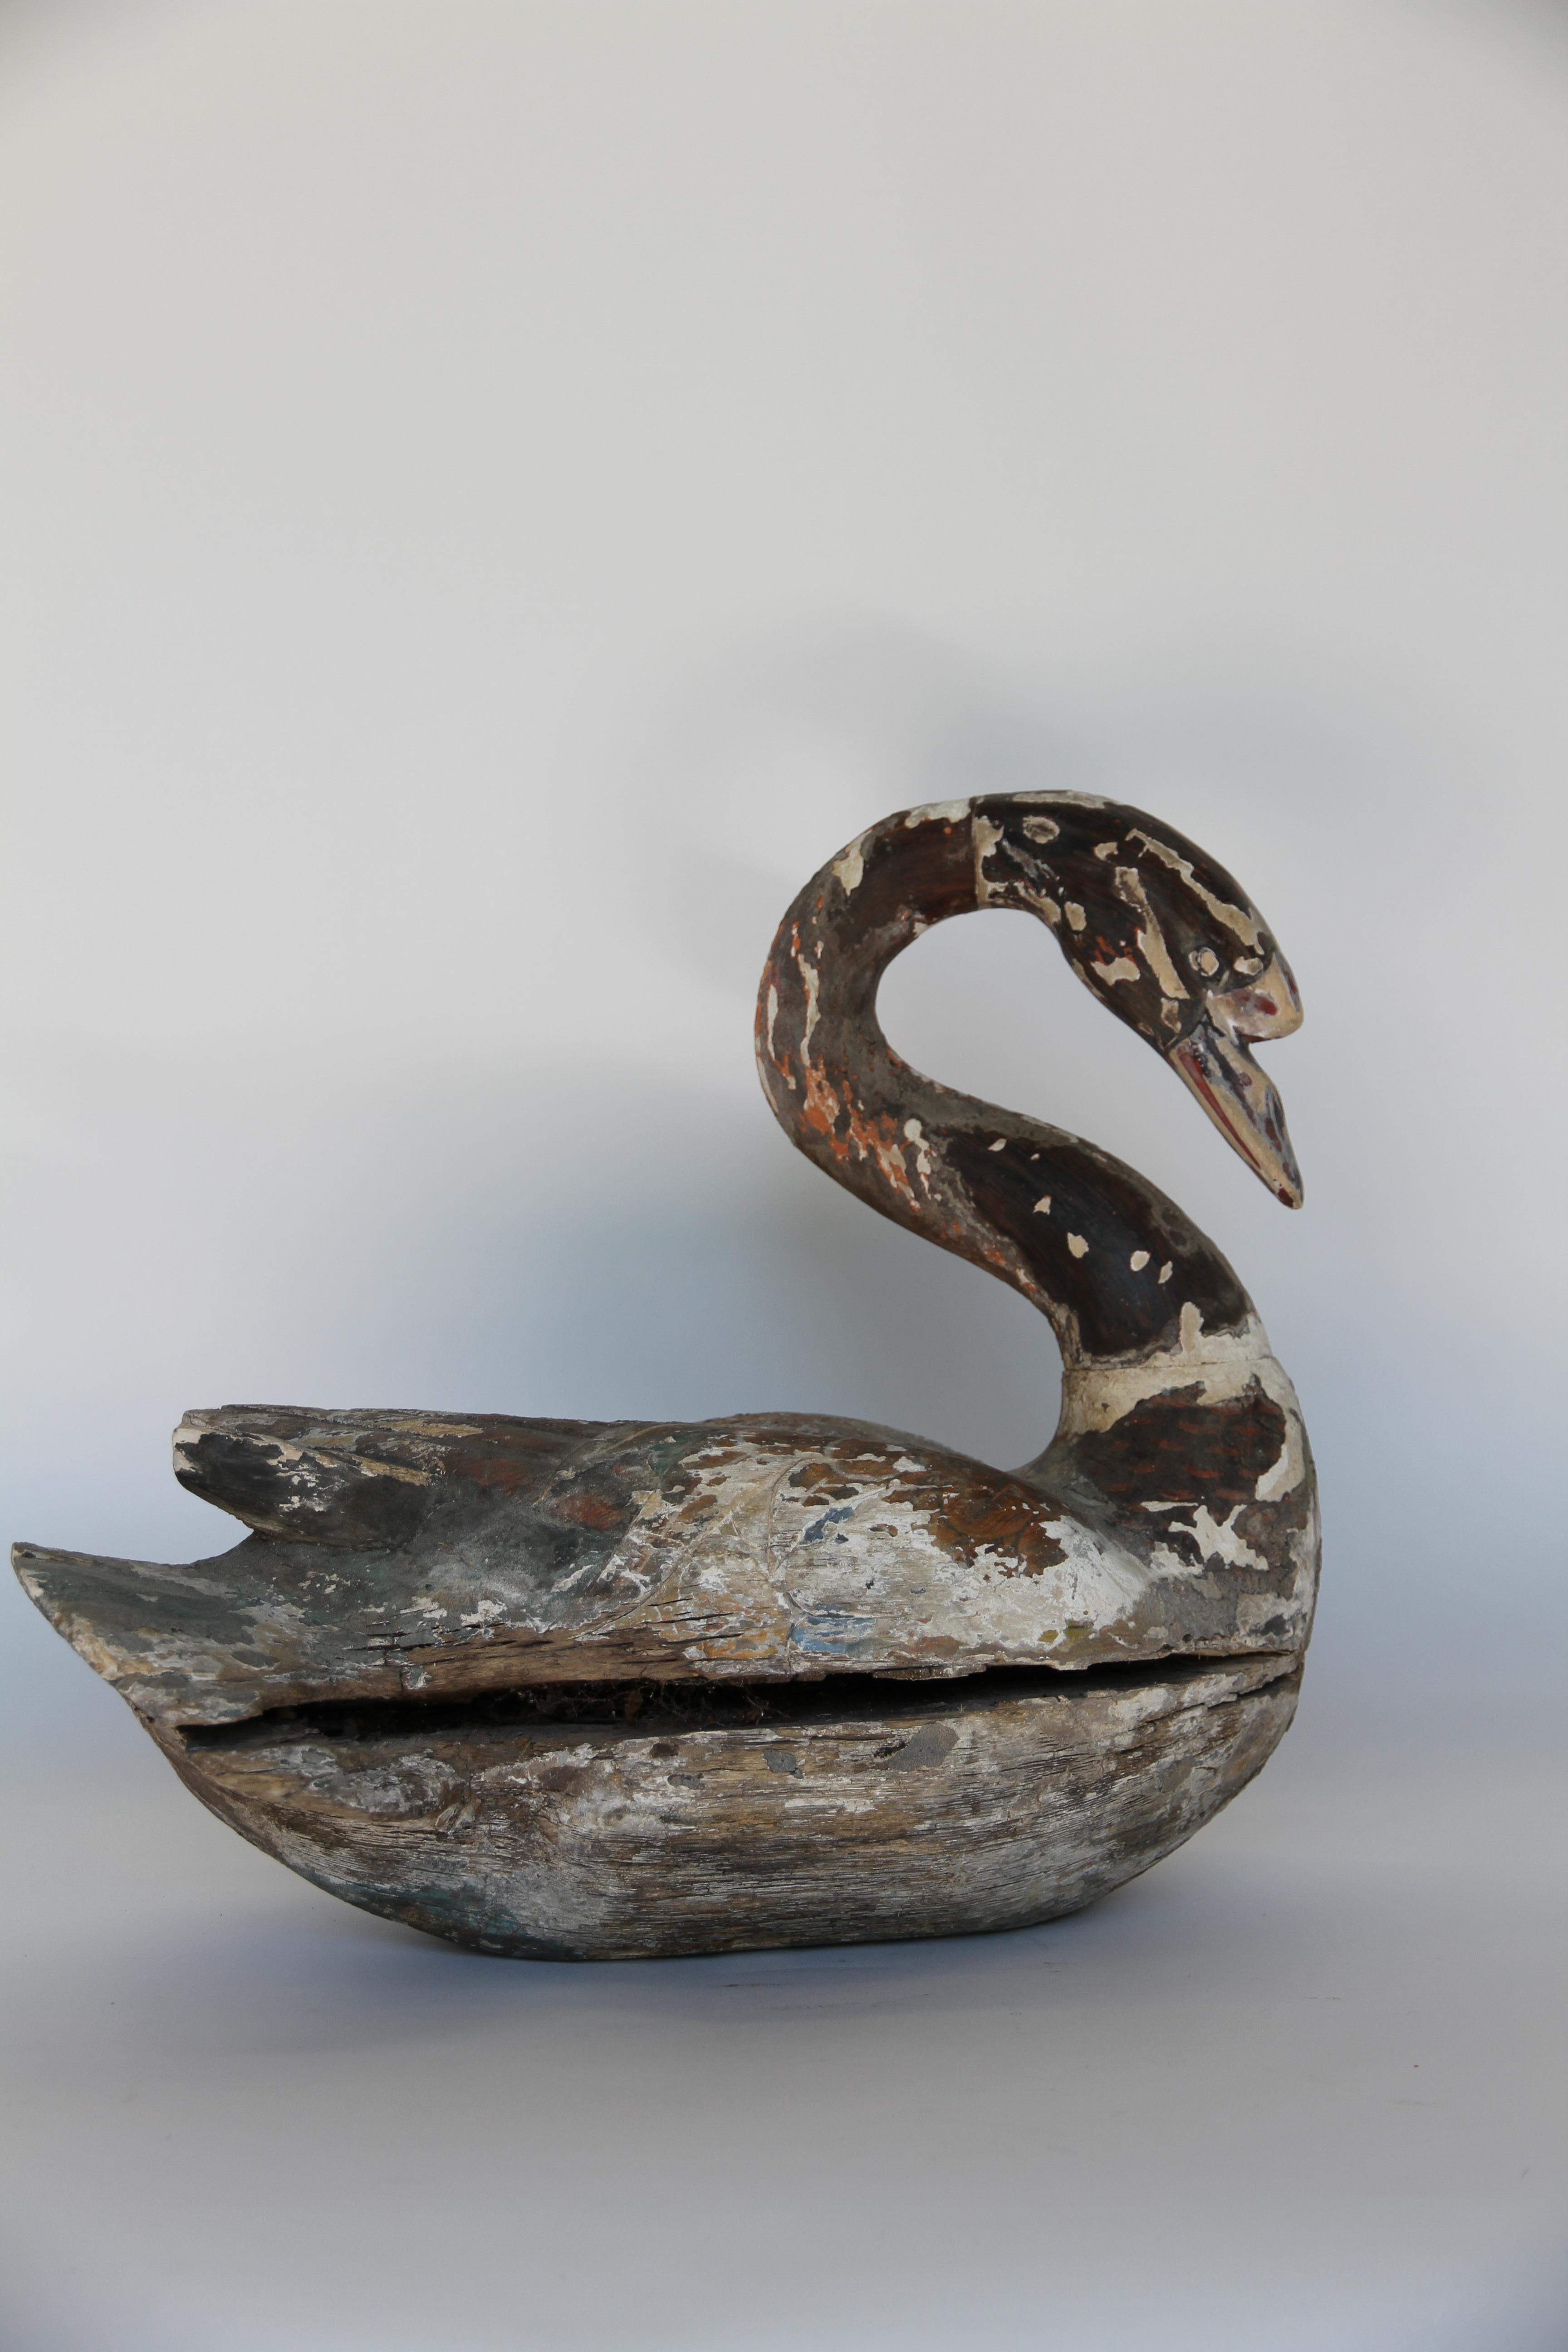 Found in France, a beautiful hand-carved swan with a lovely worn painted patina. This swan was carved from two pieces of wood, the body and the neck and head, which are joined together at the neck.